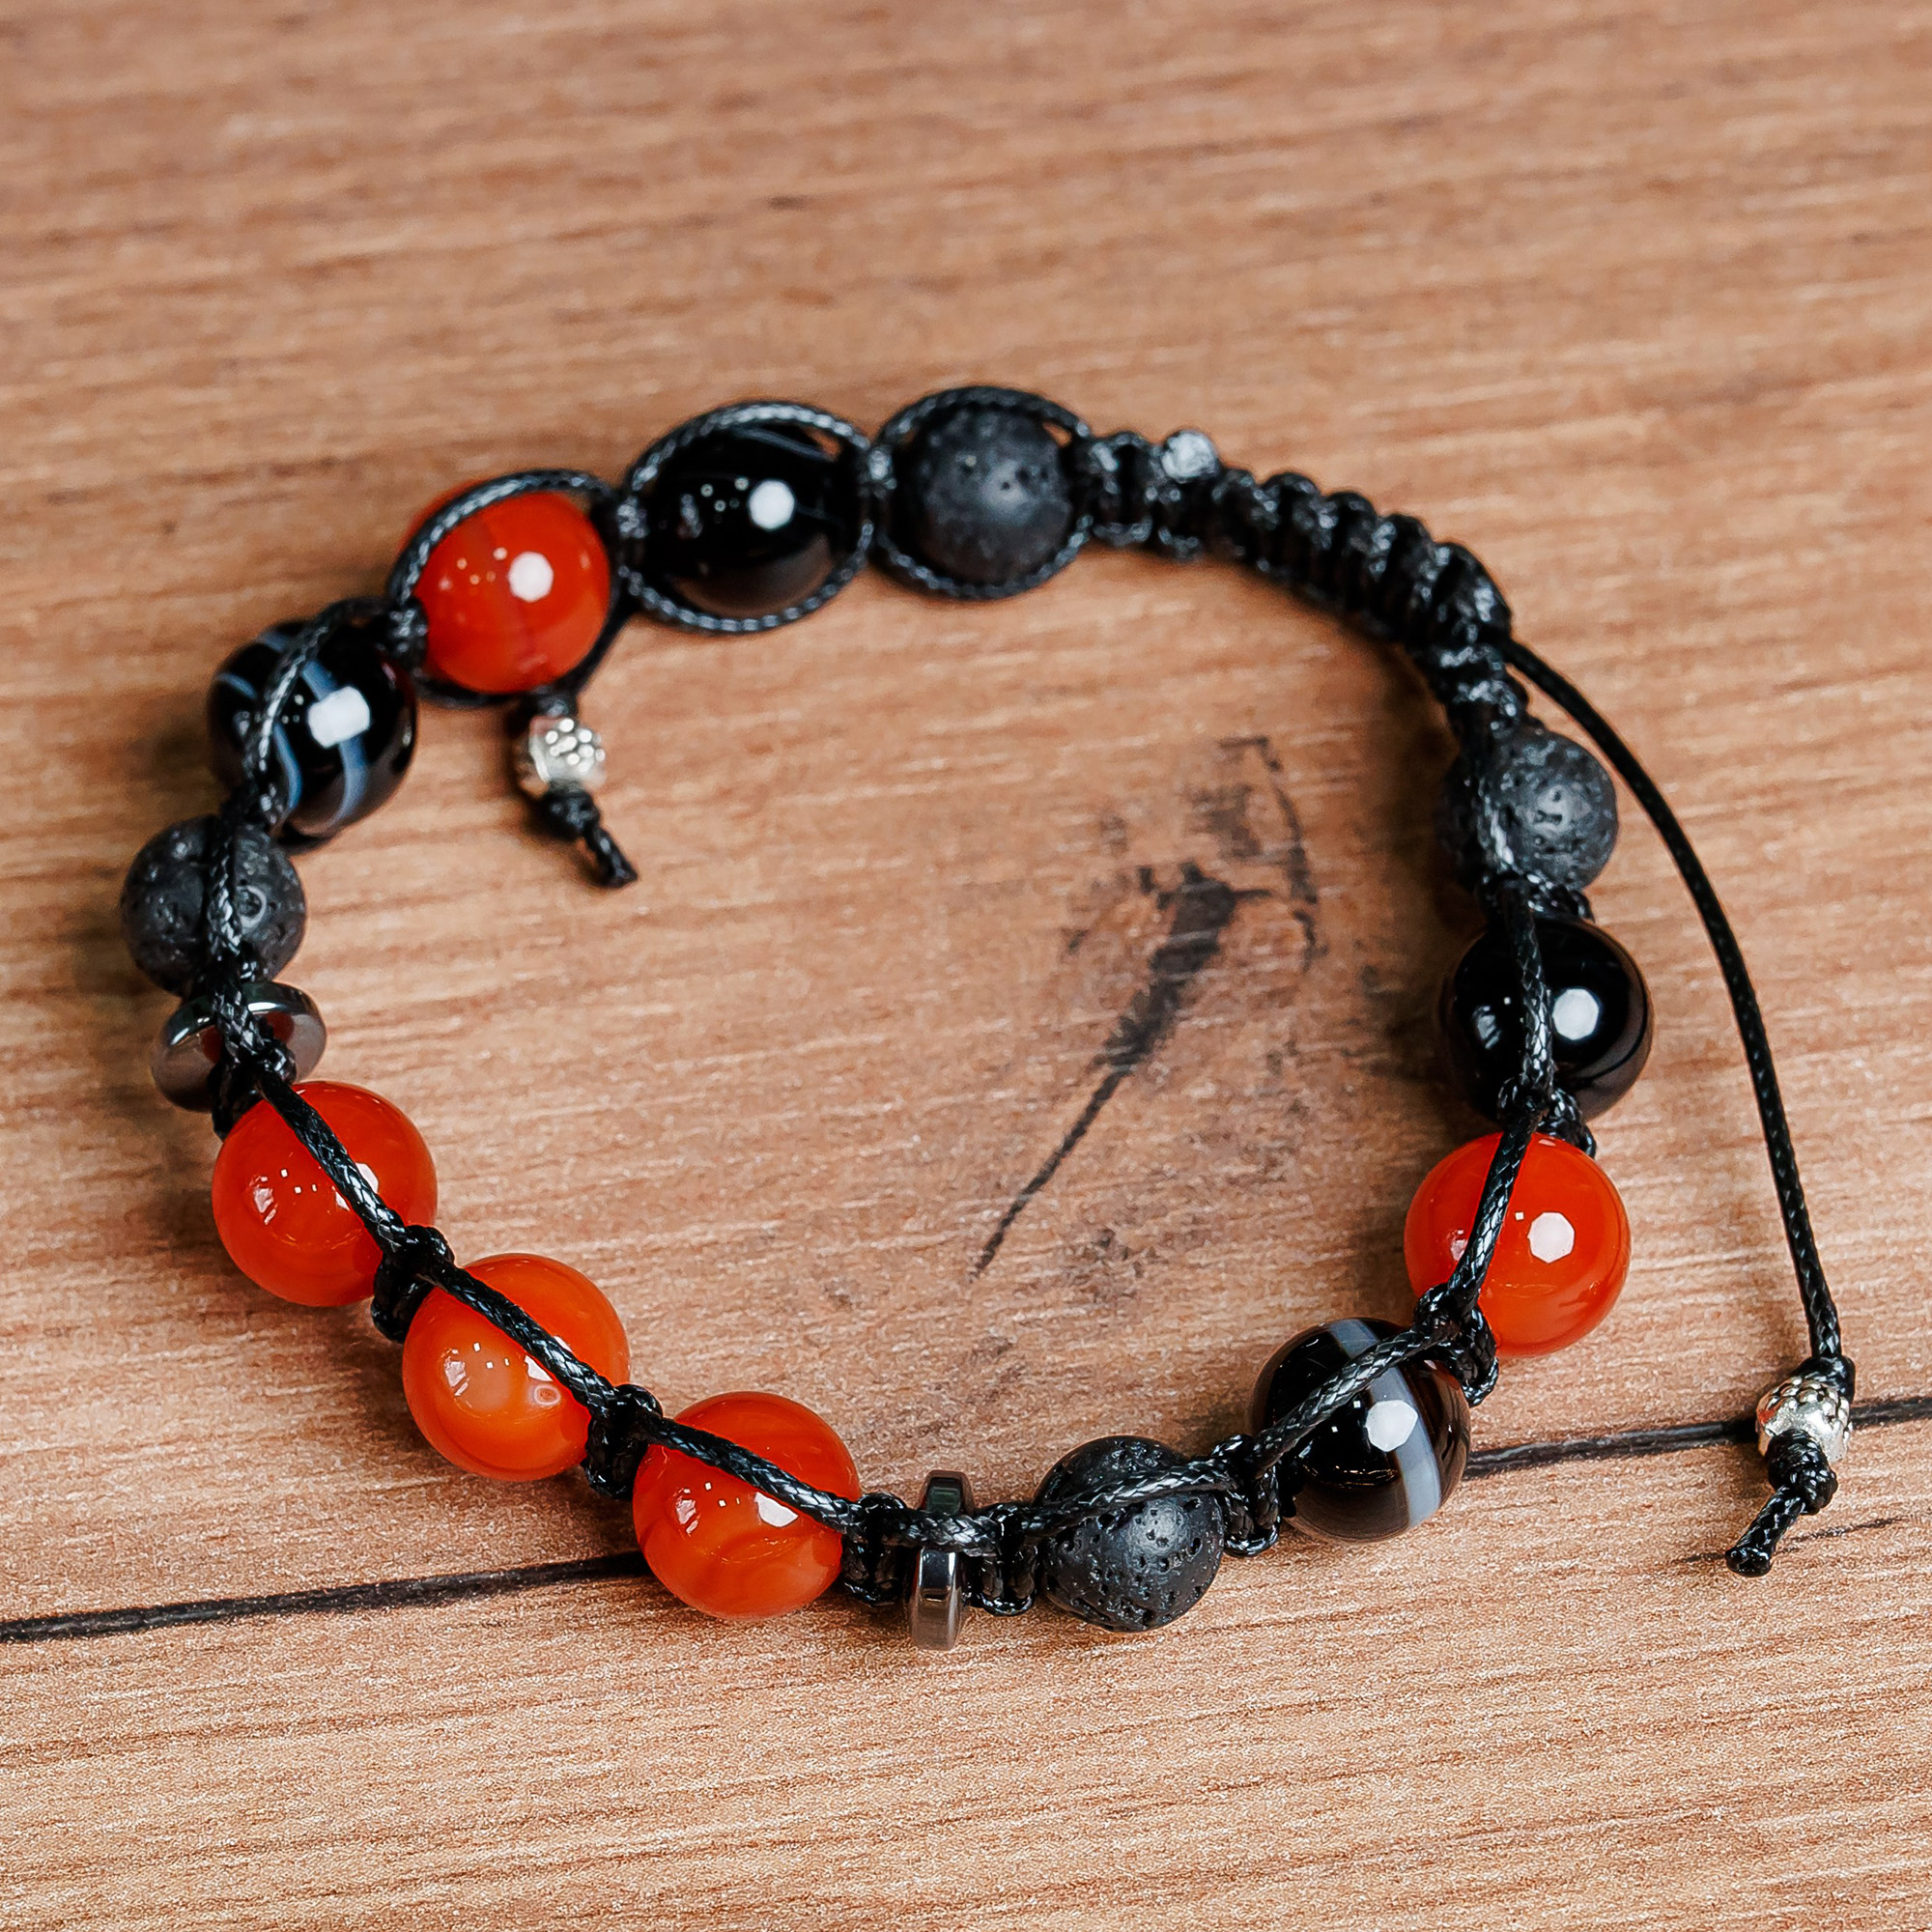 Kolbeinn - 8mm - Black Lava Stone Beaded Stretchy Bracelet with Gun Black Leopard & Faceted Red Imitation Coral Beads